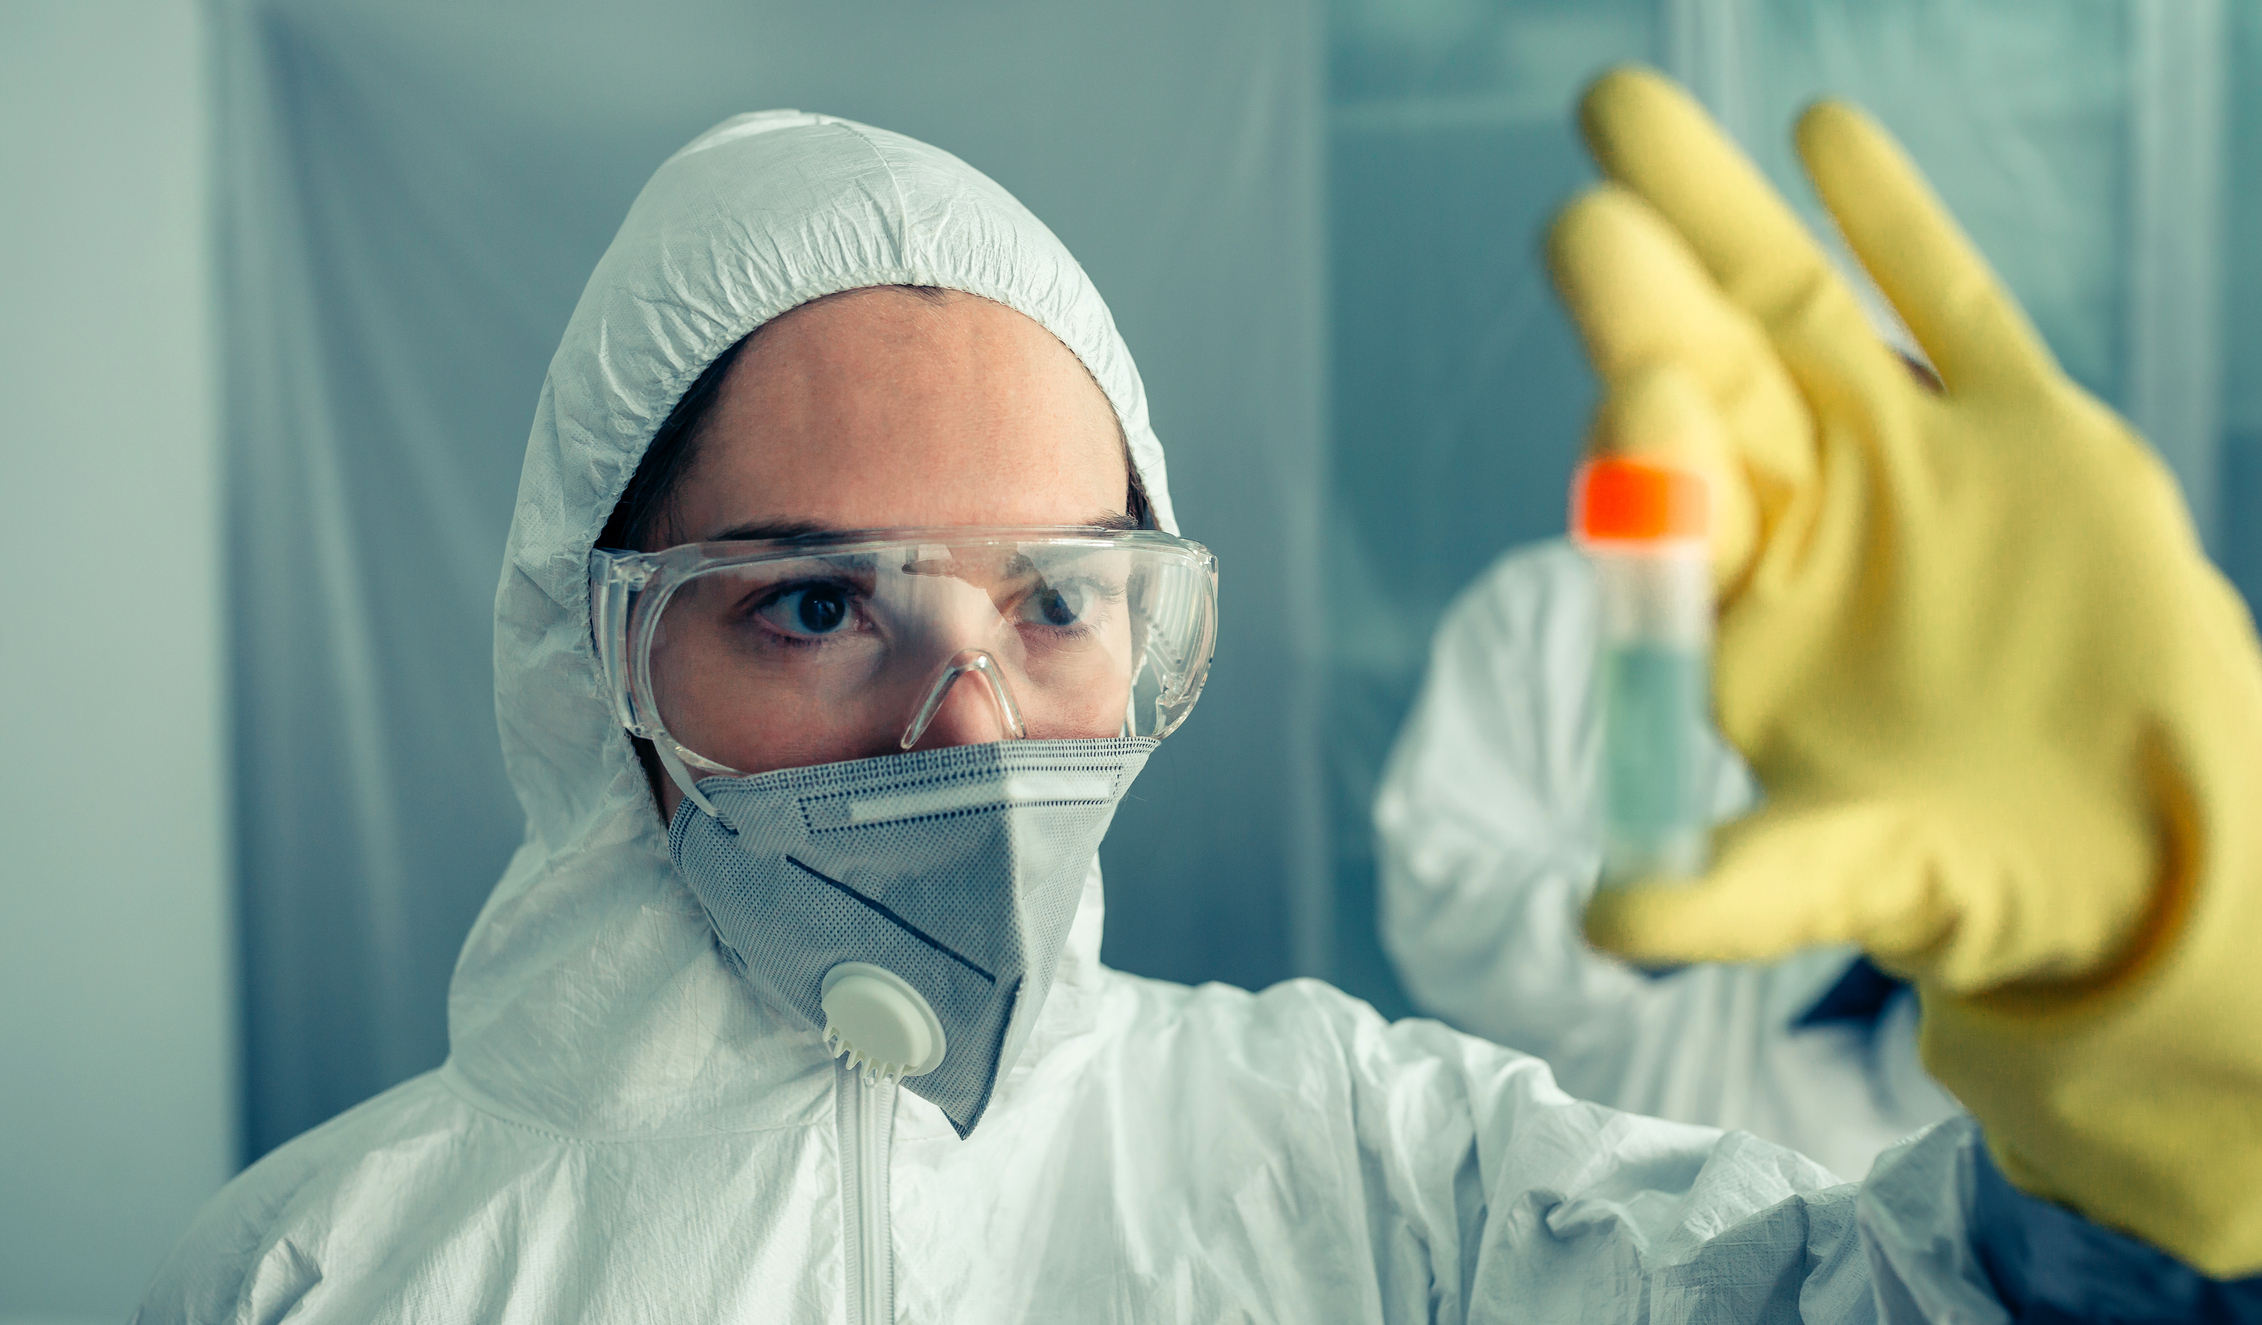 Researcher in a biosafety suit looking at a vial